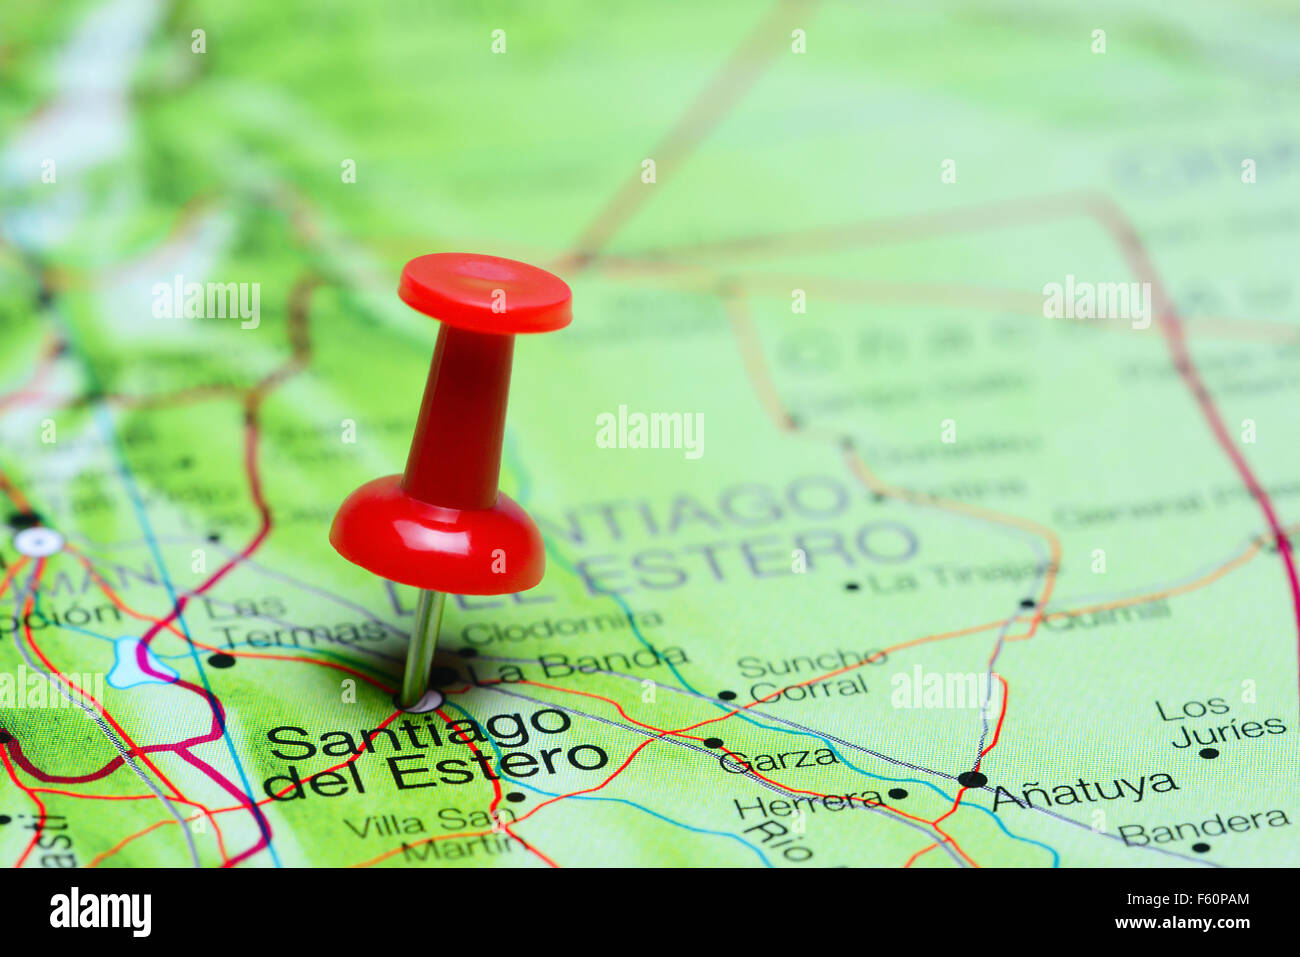 Santiago del Estero pinned on a map of Argentina Stock Photo